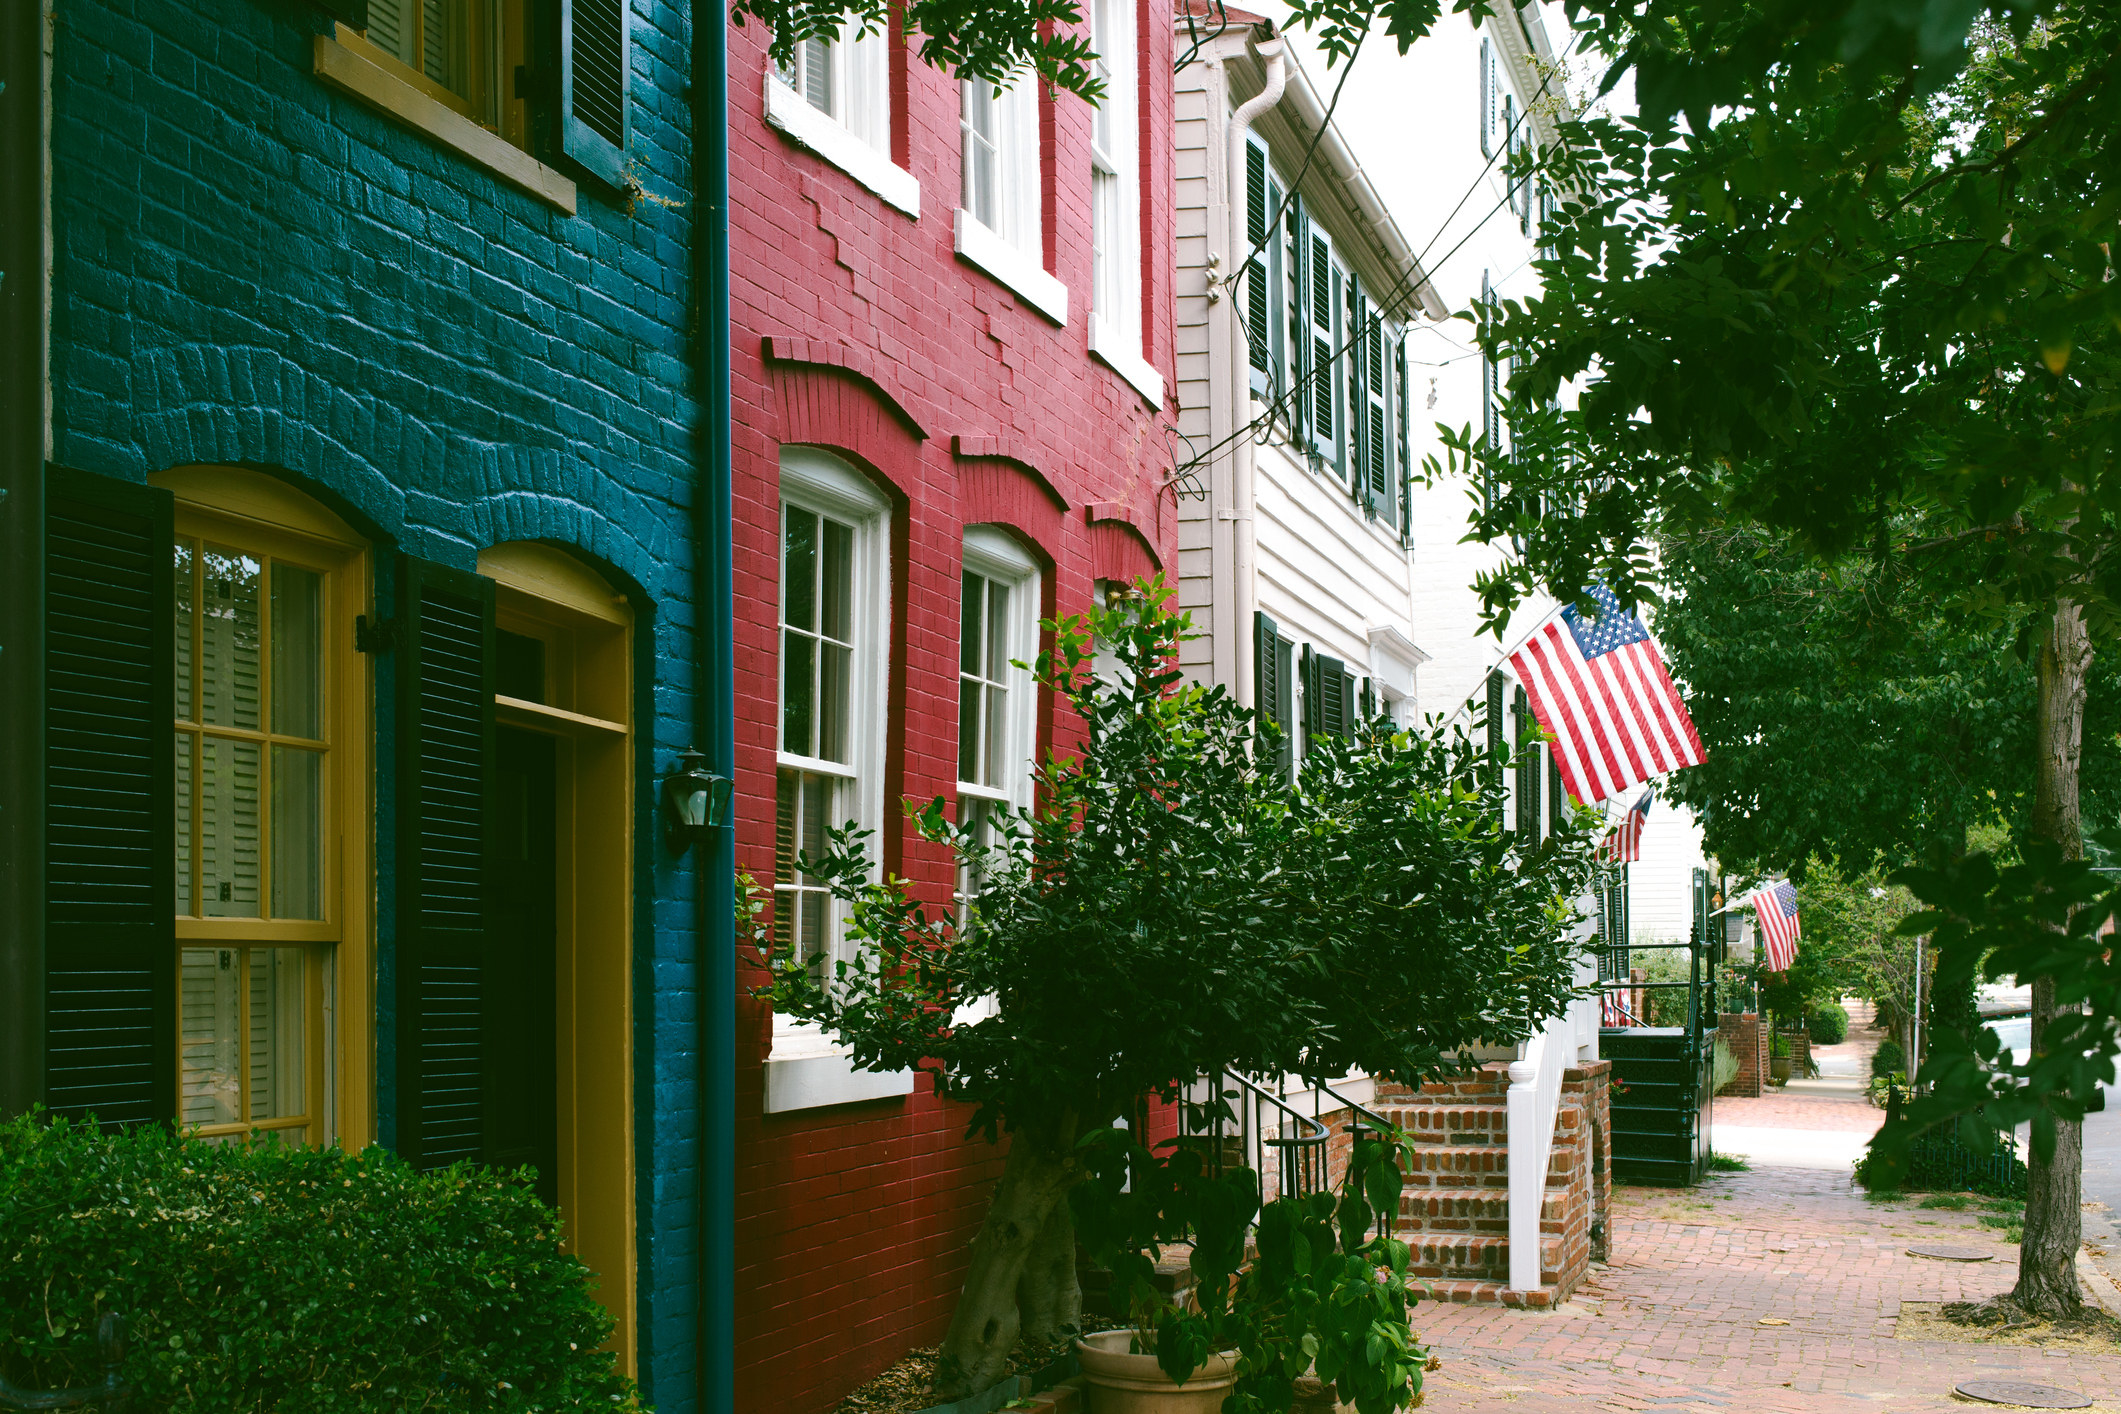 View from a residential street in Old Town Alexandria.